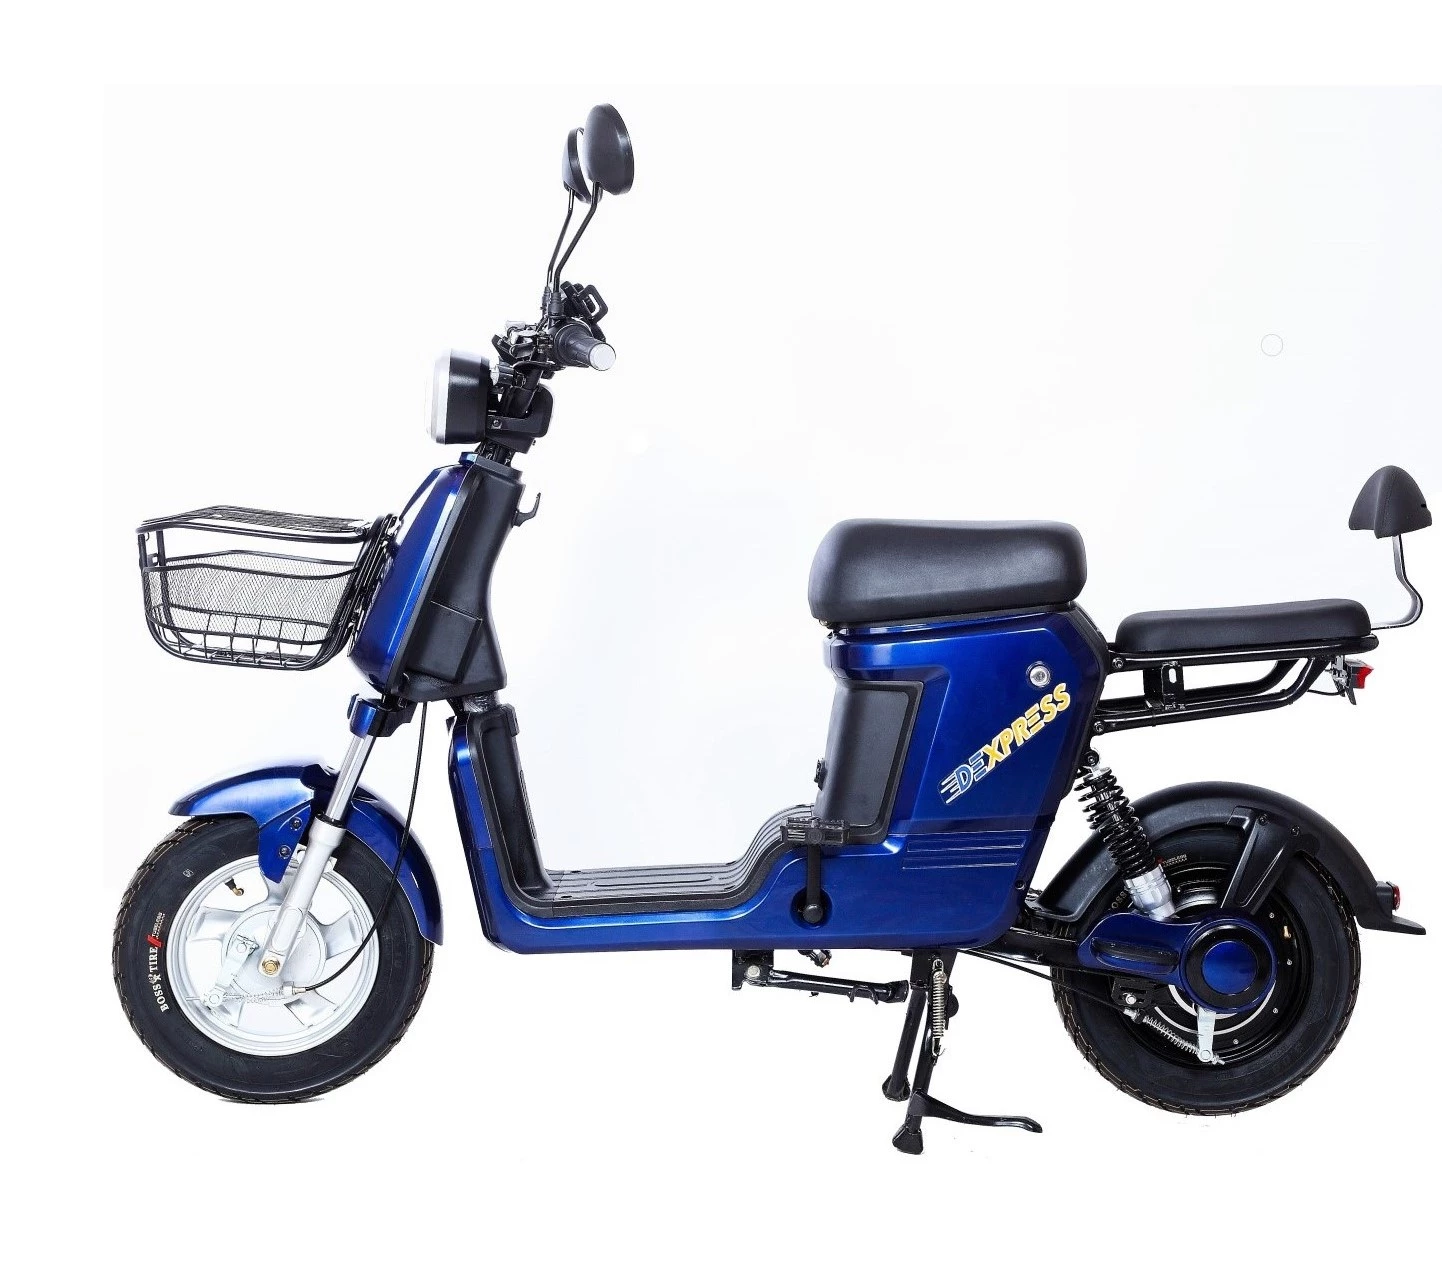 Dexpress Delite Limited Edition with Blue color